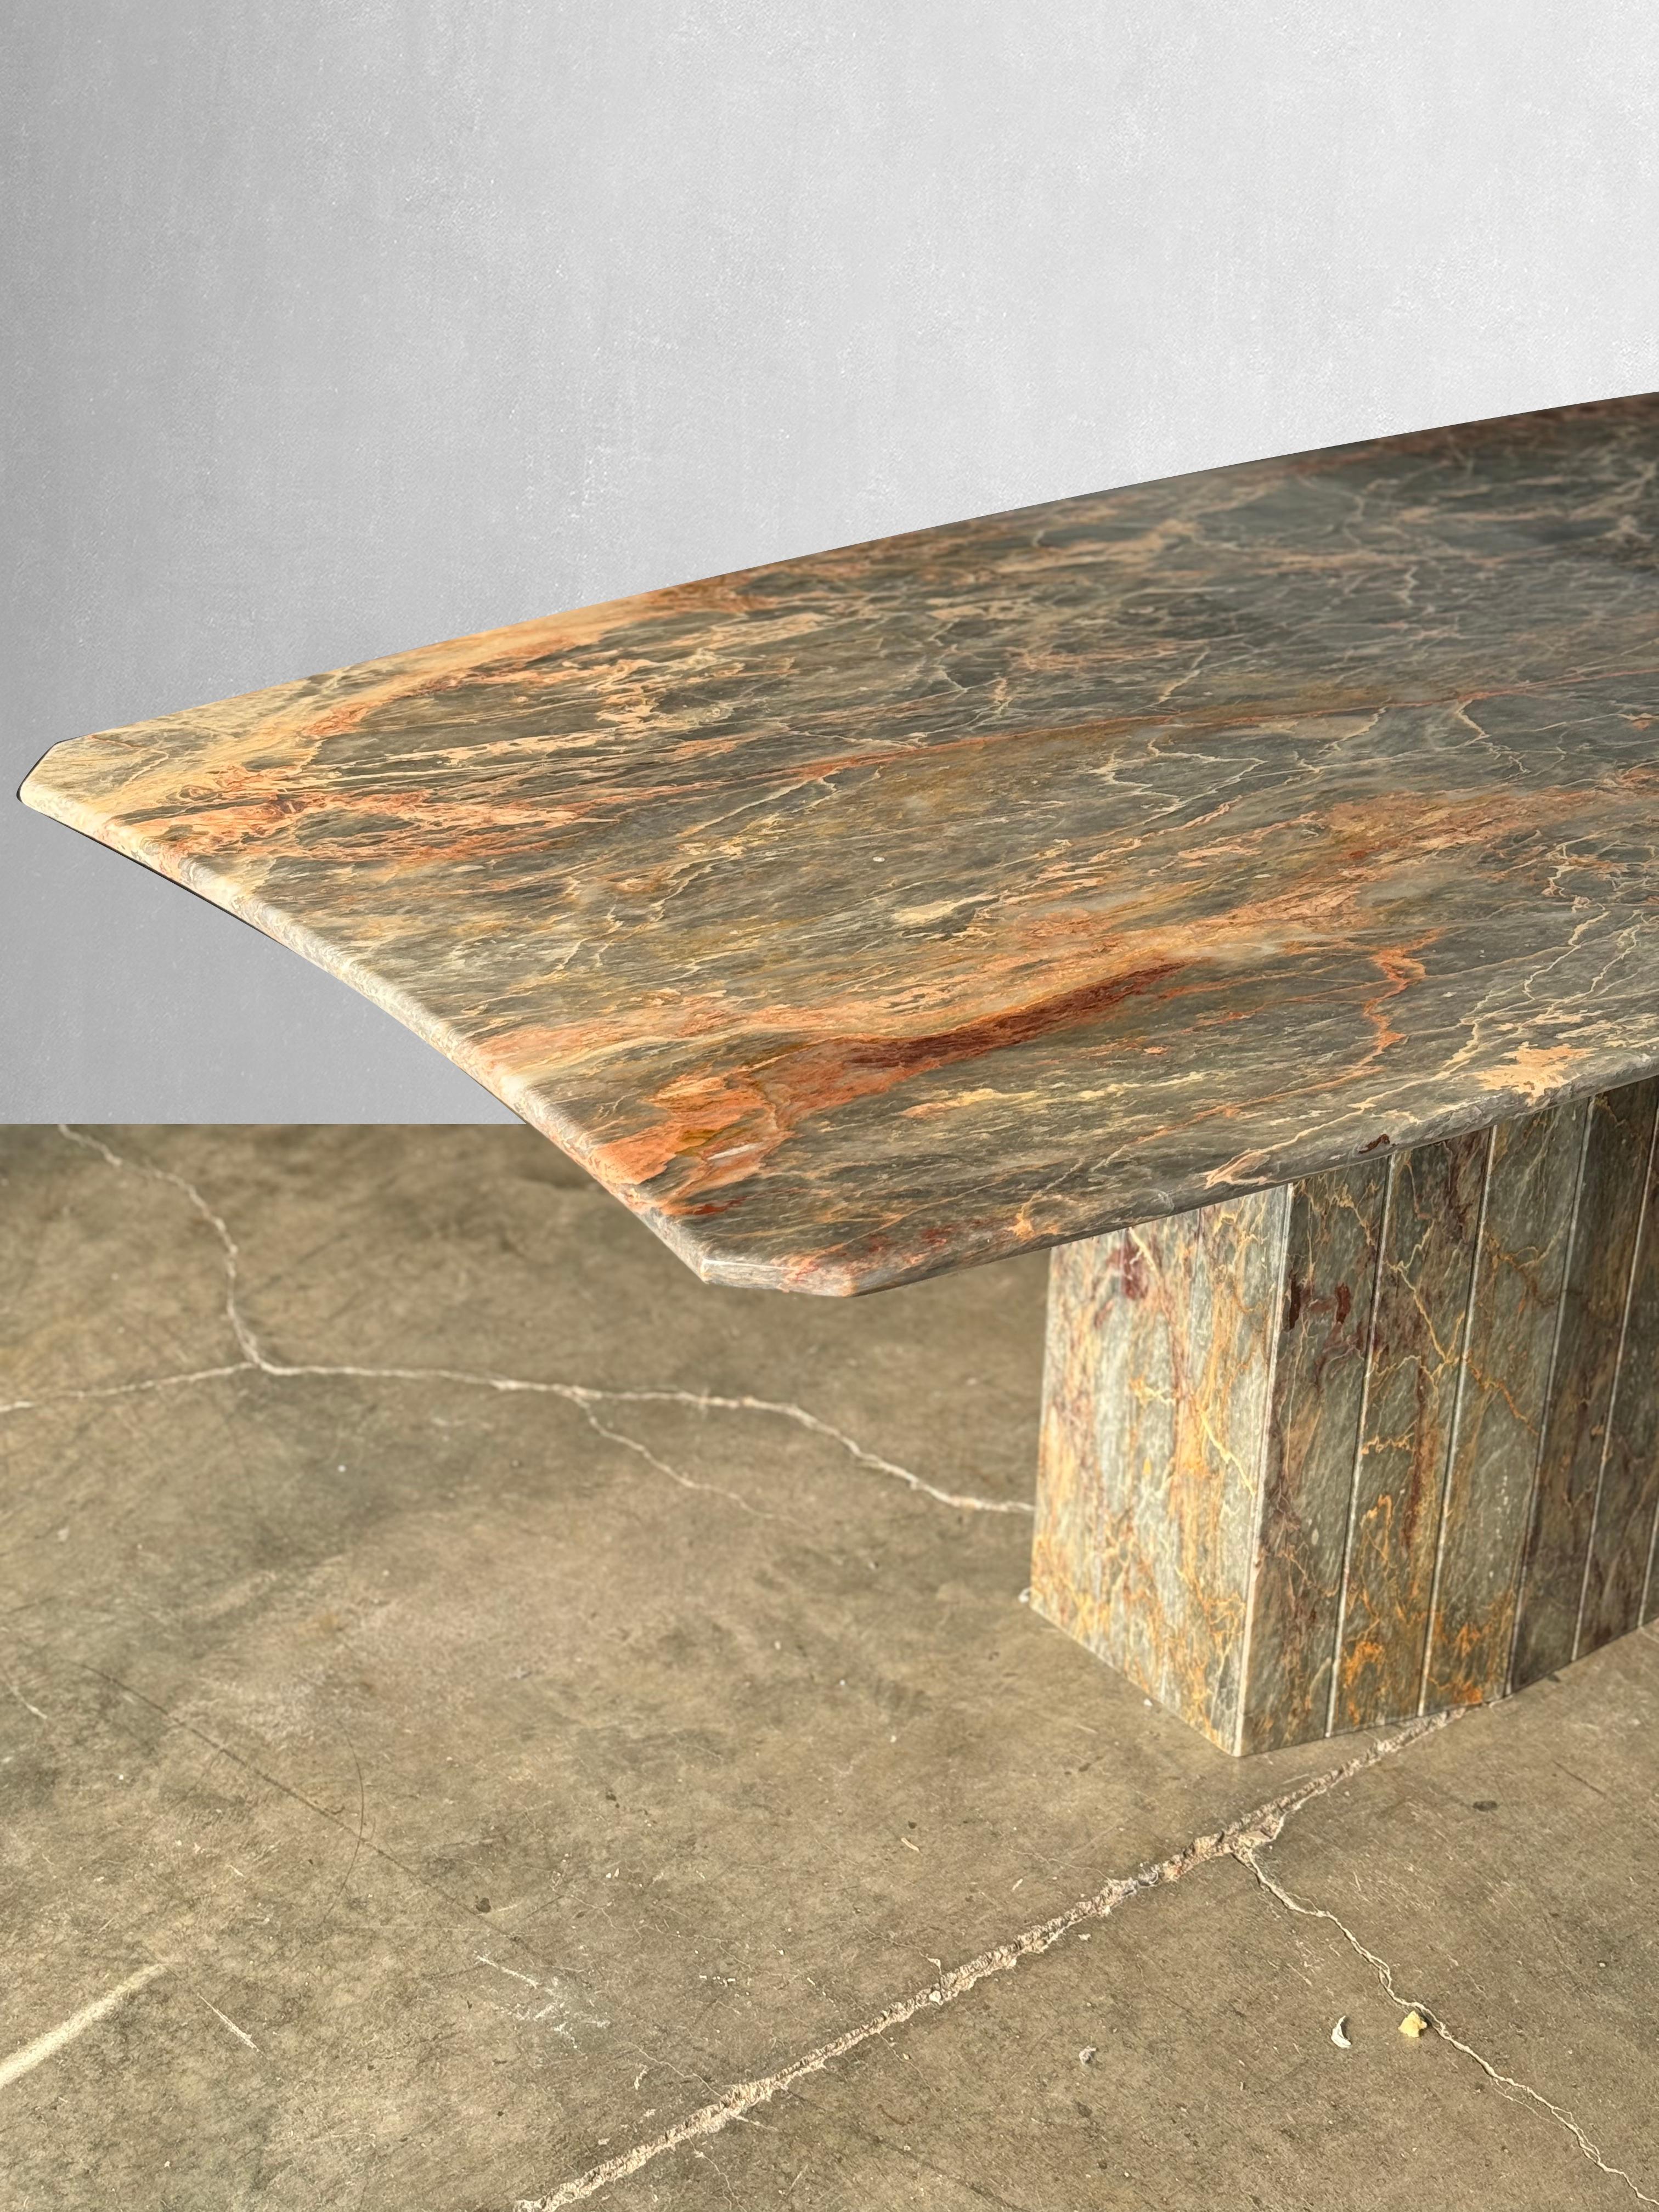 Late 20th Century Vintage Fior Di Pesco Marble Dining Table by Roche Bobois.